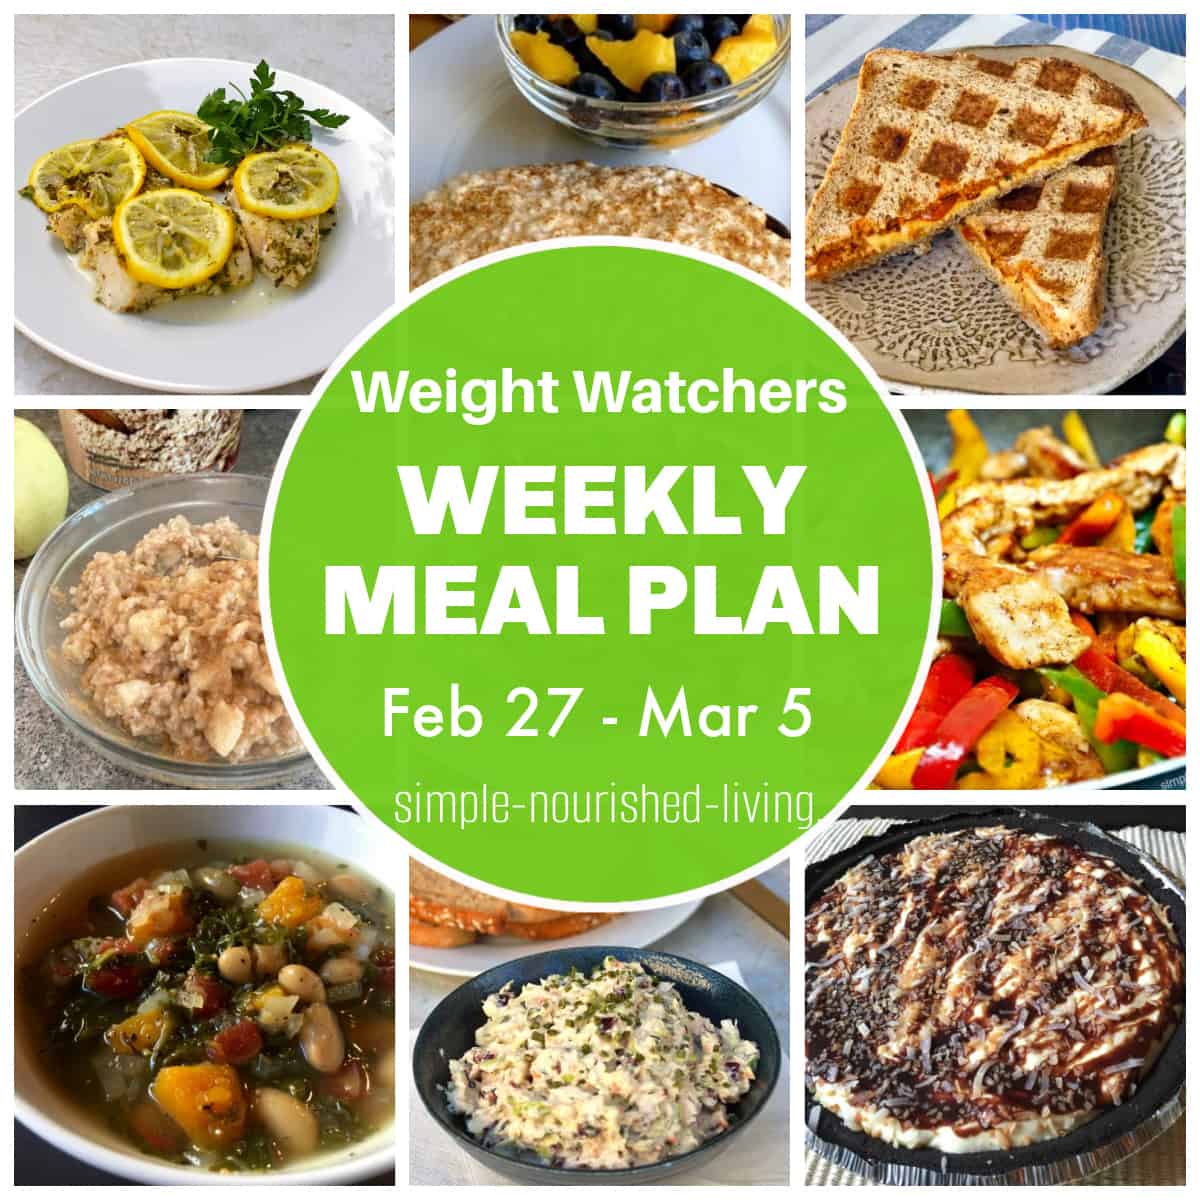 Food Collage: Lemon Baked Fish, Cottage Cheese Toast, Tomato Soup Grilled Cheese, Sugar Free Apple Pie oatmeal, Easy Chicken Fajitas, Squash, Kale, White Bean Soup, Crunchy Tuna Salad, Easy No Bake Candy Pie with Round Green Text Box: Weight Watchers Weekly Meal Plan Feb 27 - Mar 5 Simple Nourished Living